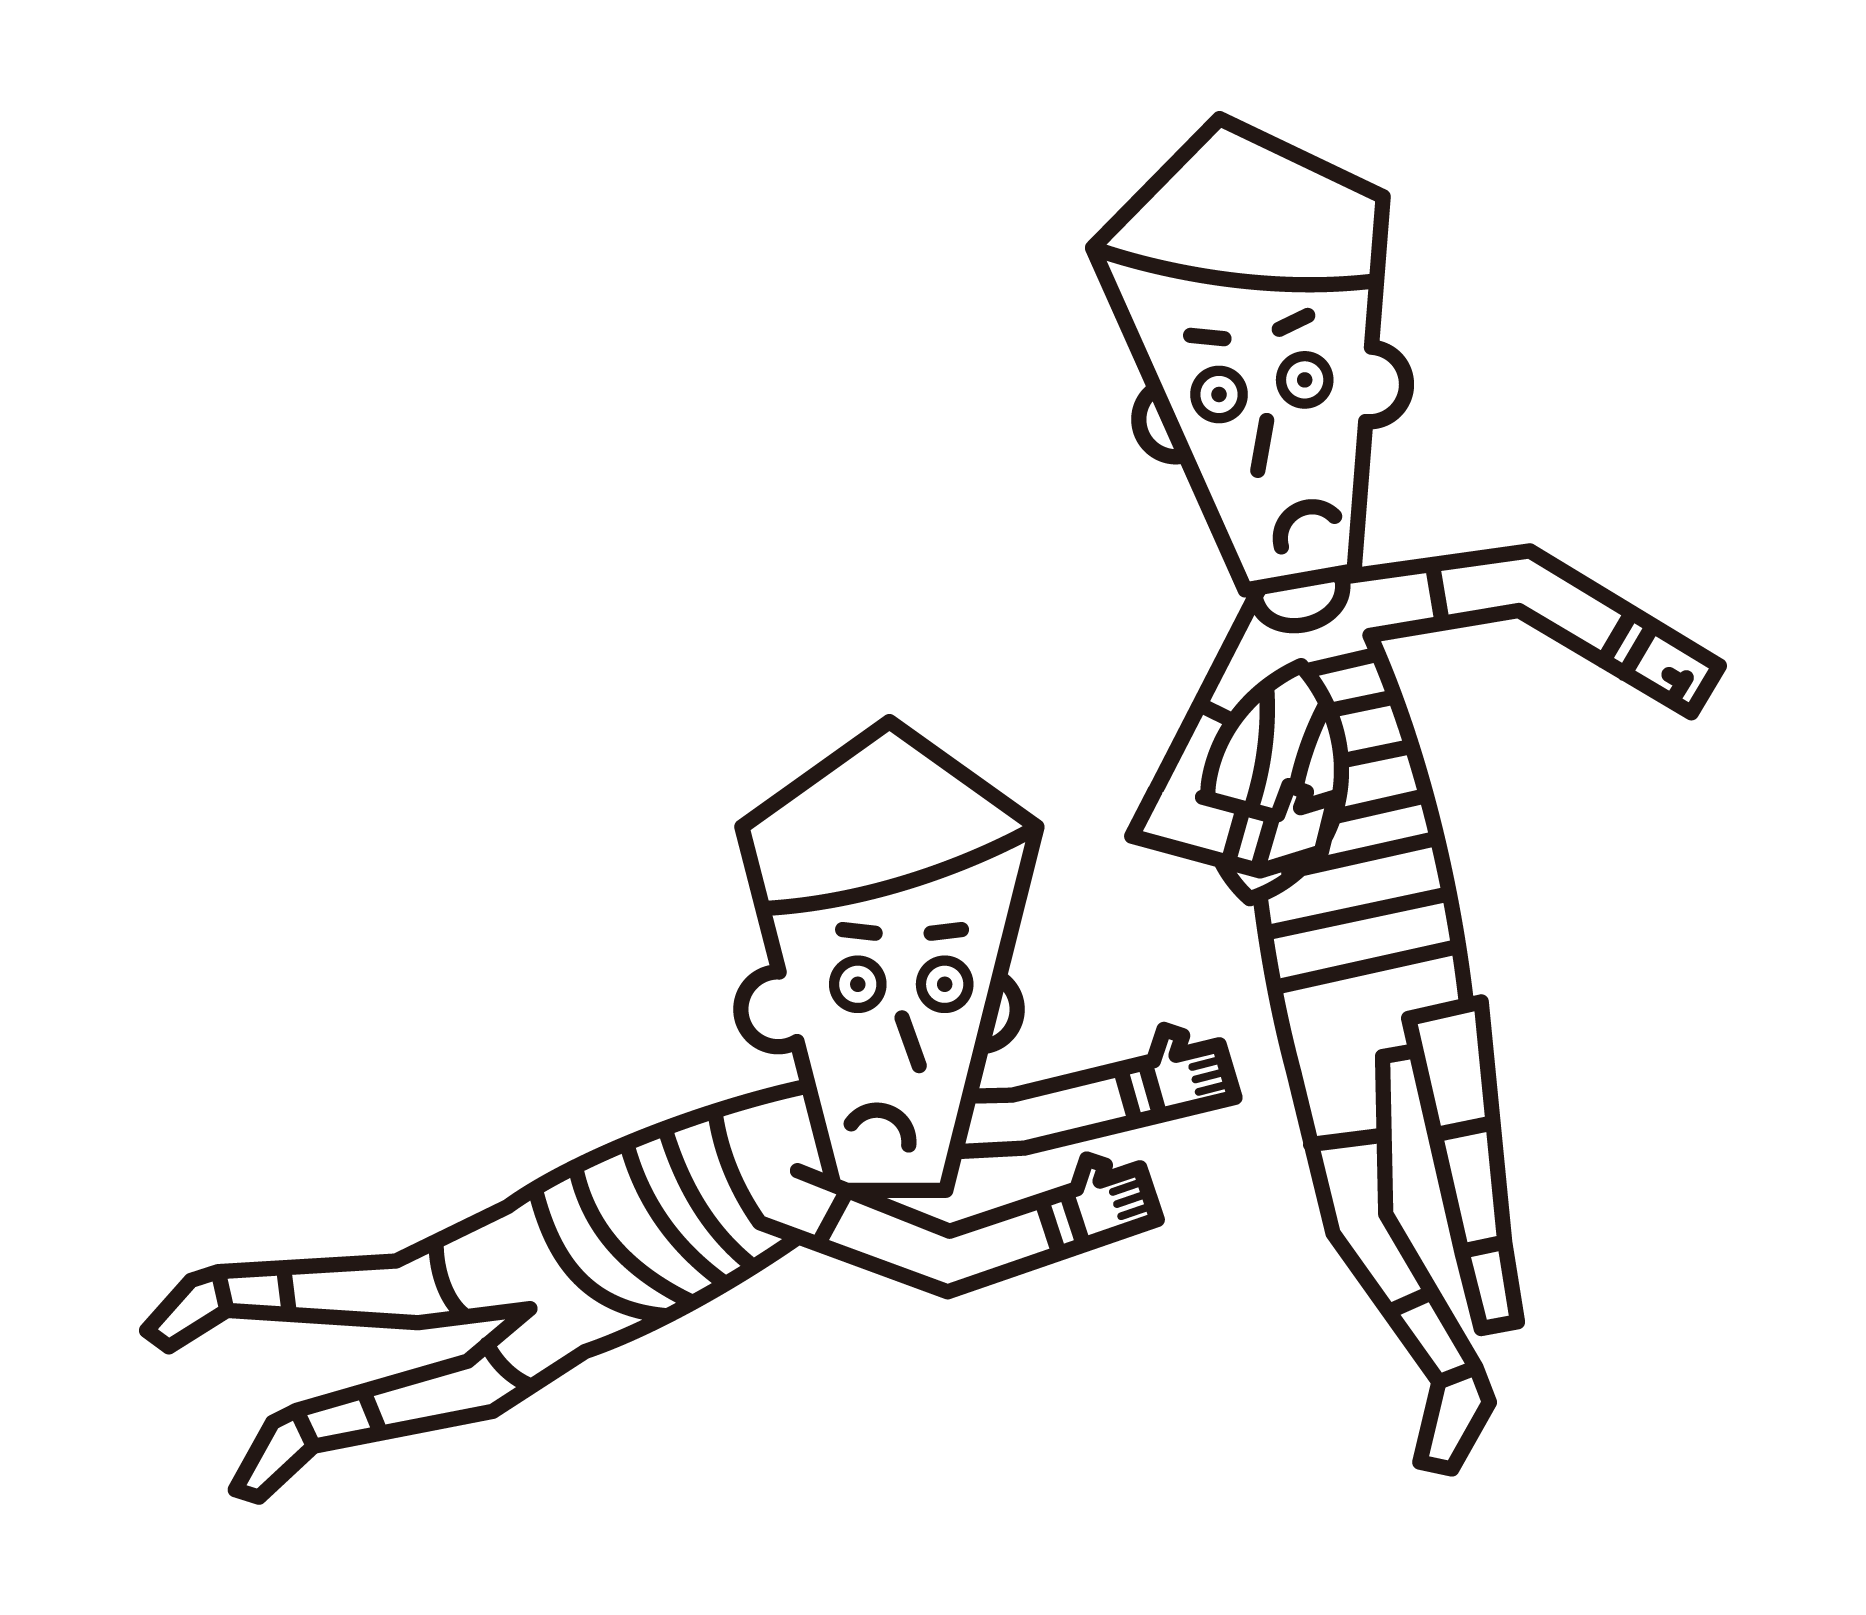 Illustration of a rugby player (male) avoiding tackles